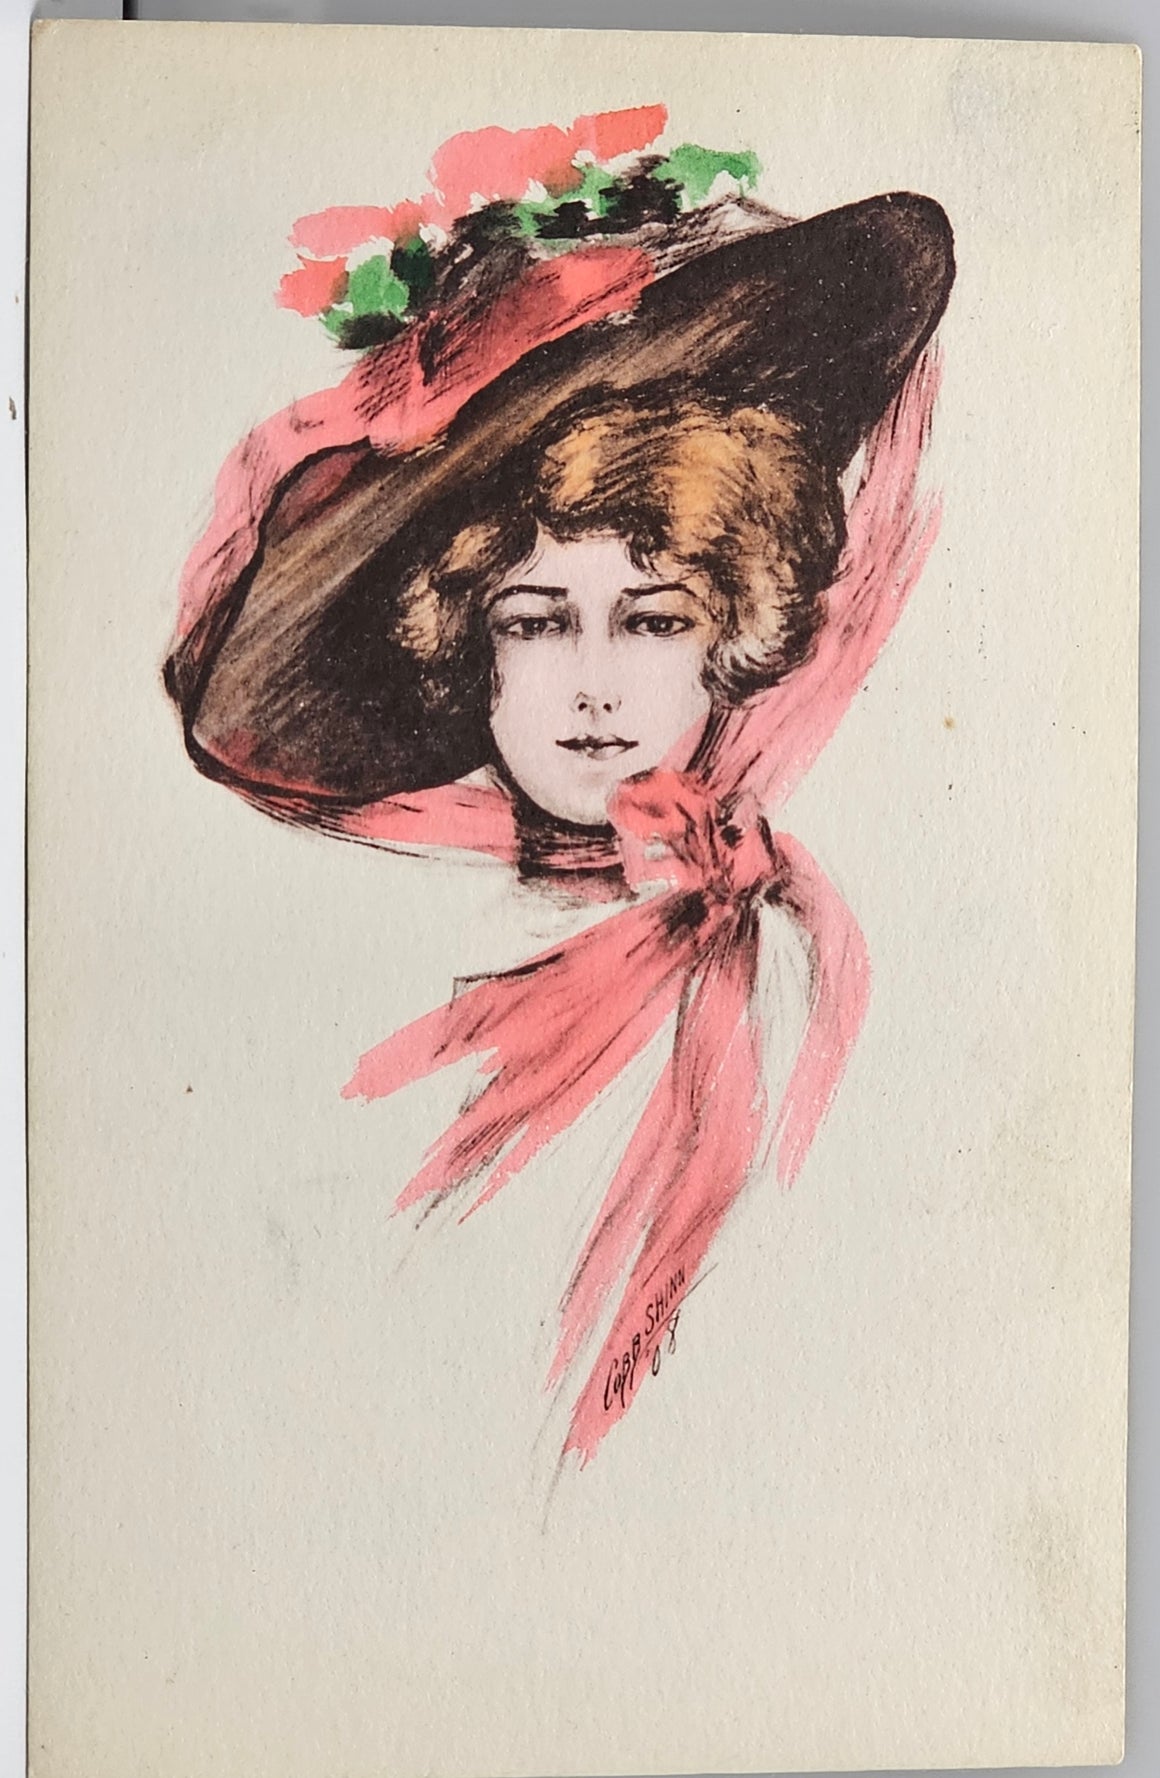 Artist Postcard Cobb Shinn Signed Edwardian Style Woman in Hat Hand Tinted Pink 1908